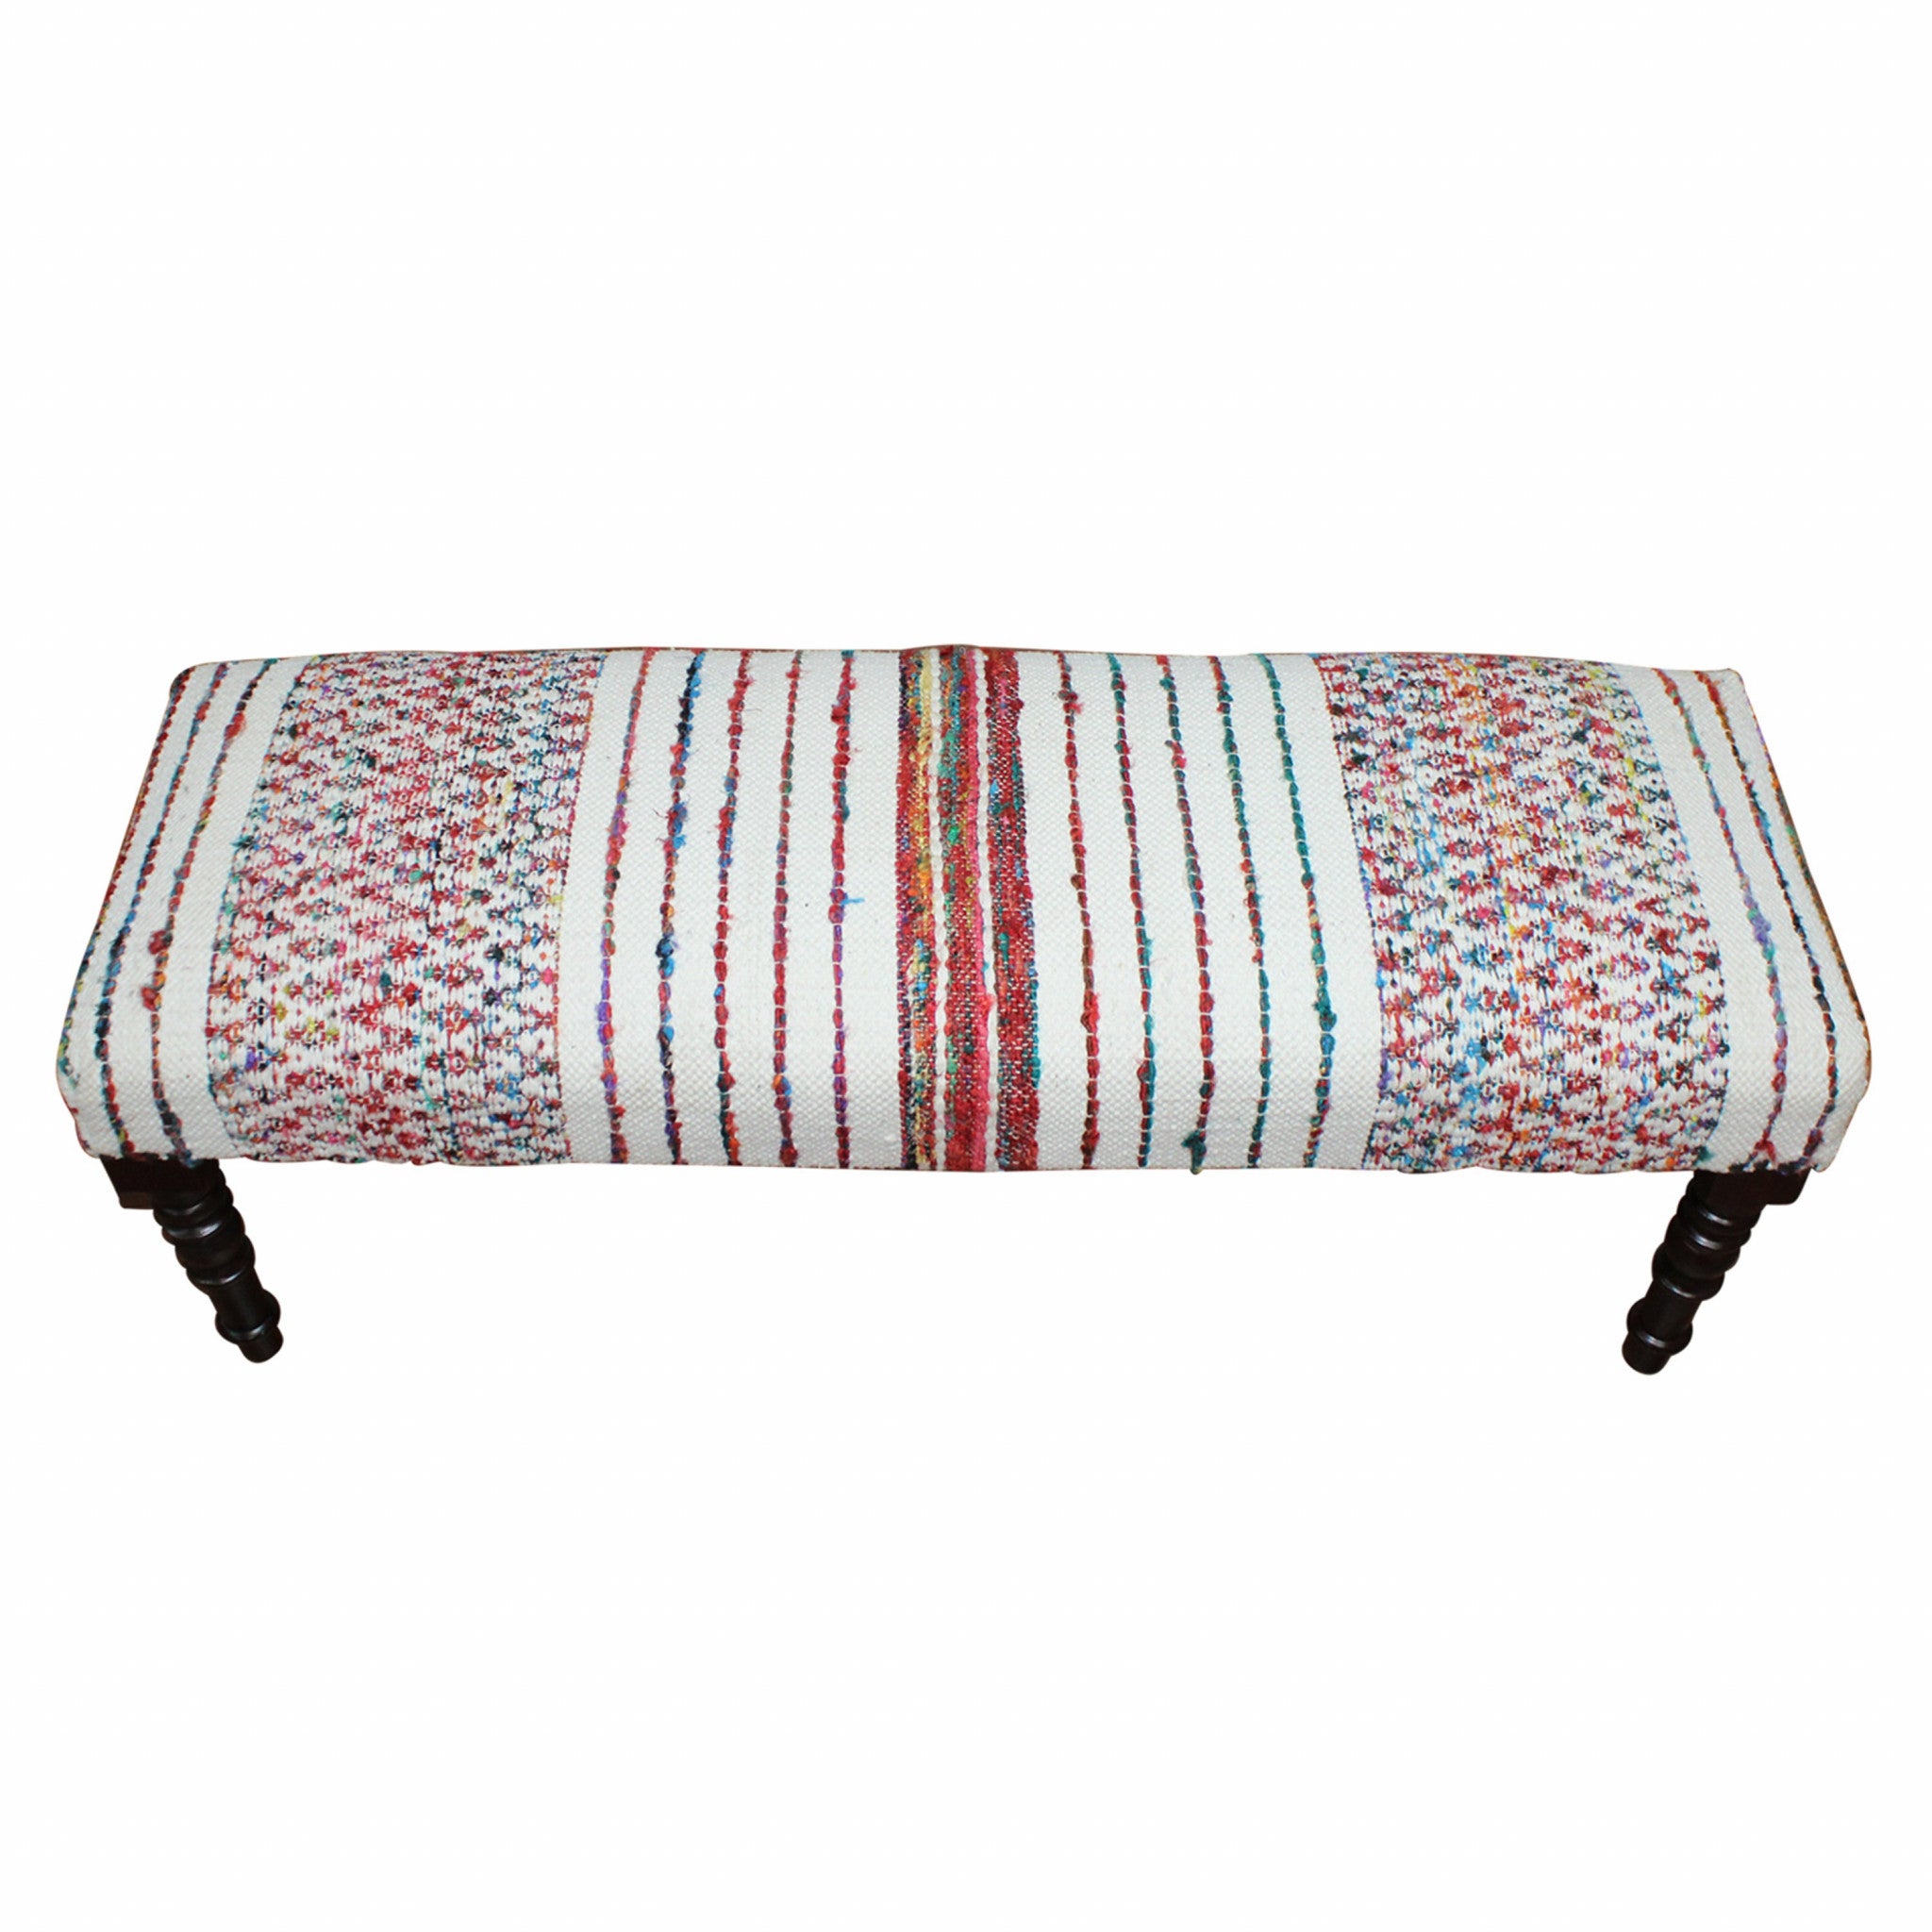 47" Ivory Red and Pink Black Leg Chevron Stripe Upholstered Bench